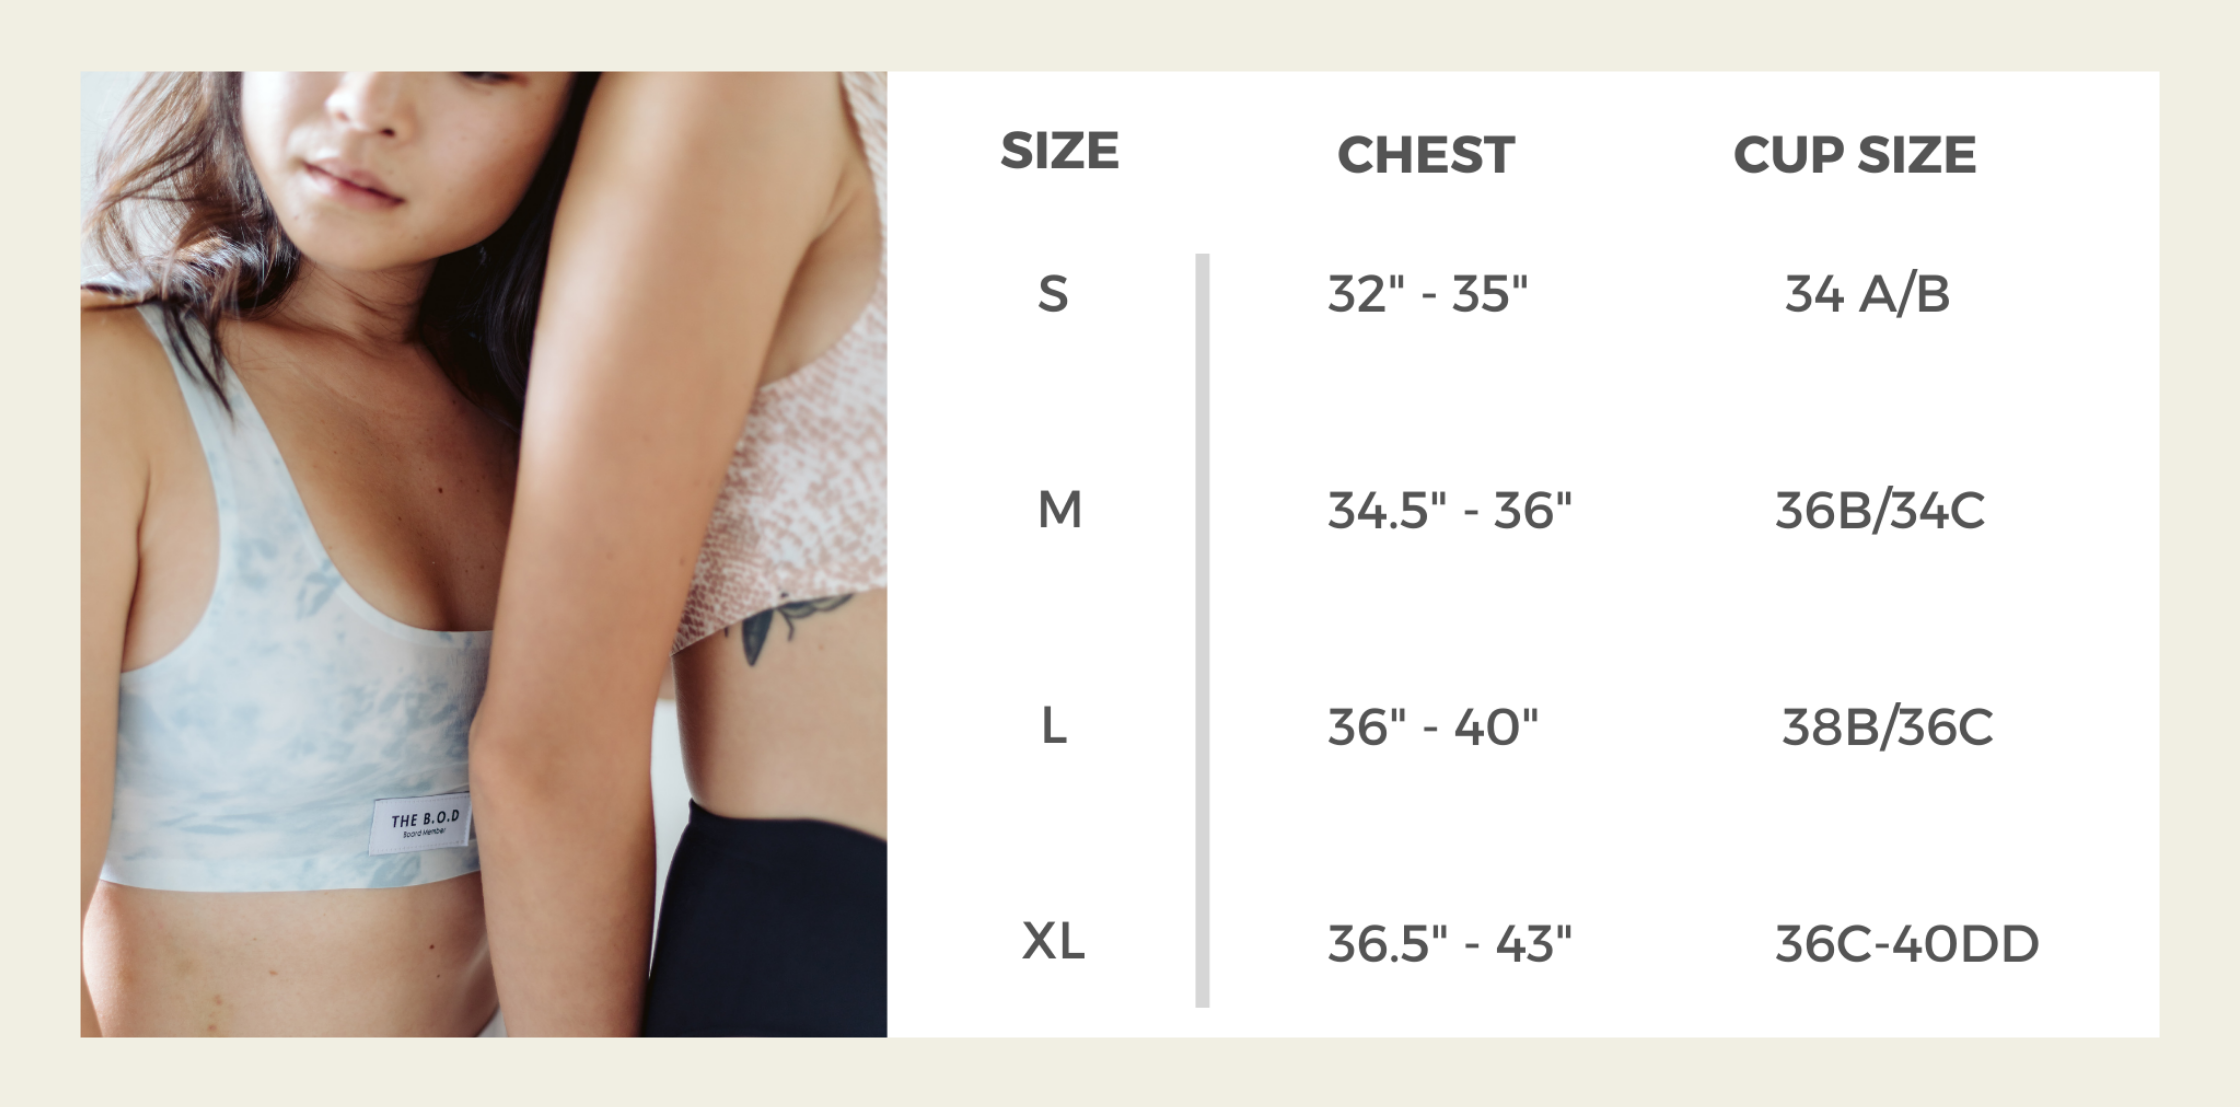 THE B.O.D Bralette Size Guide